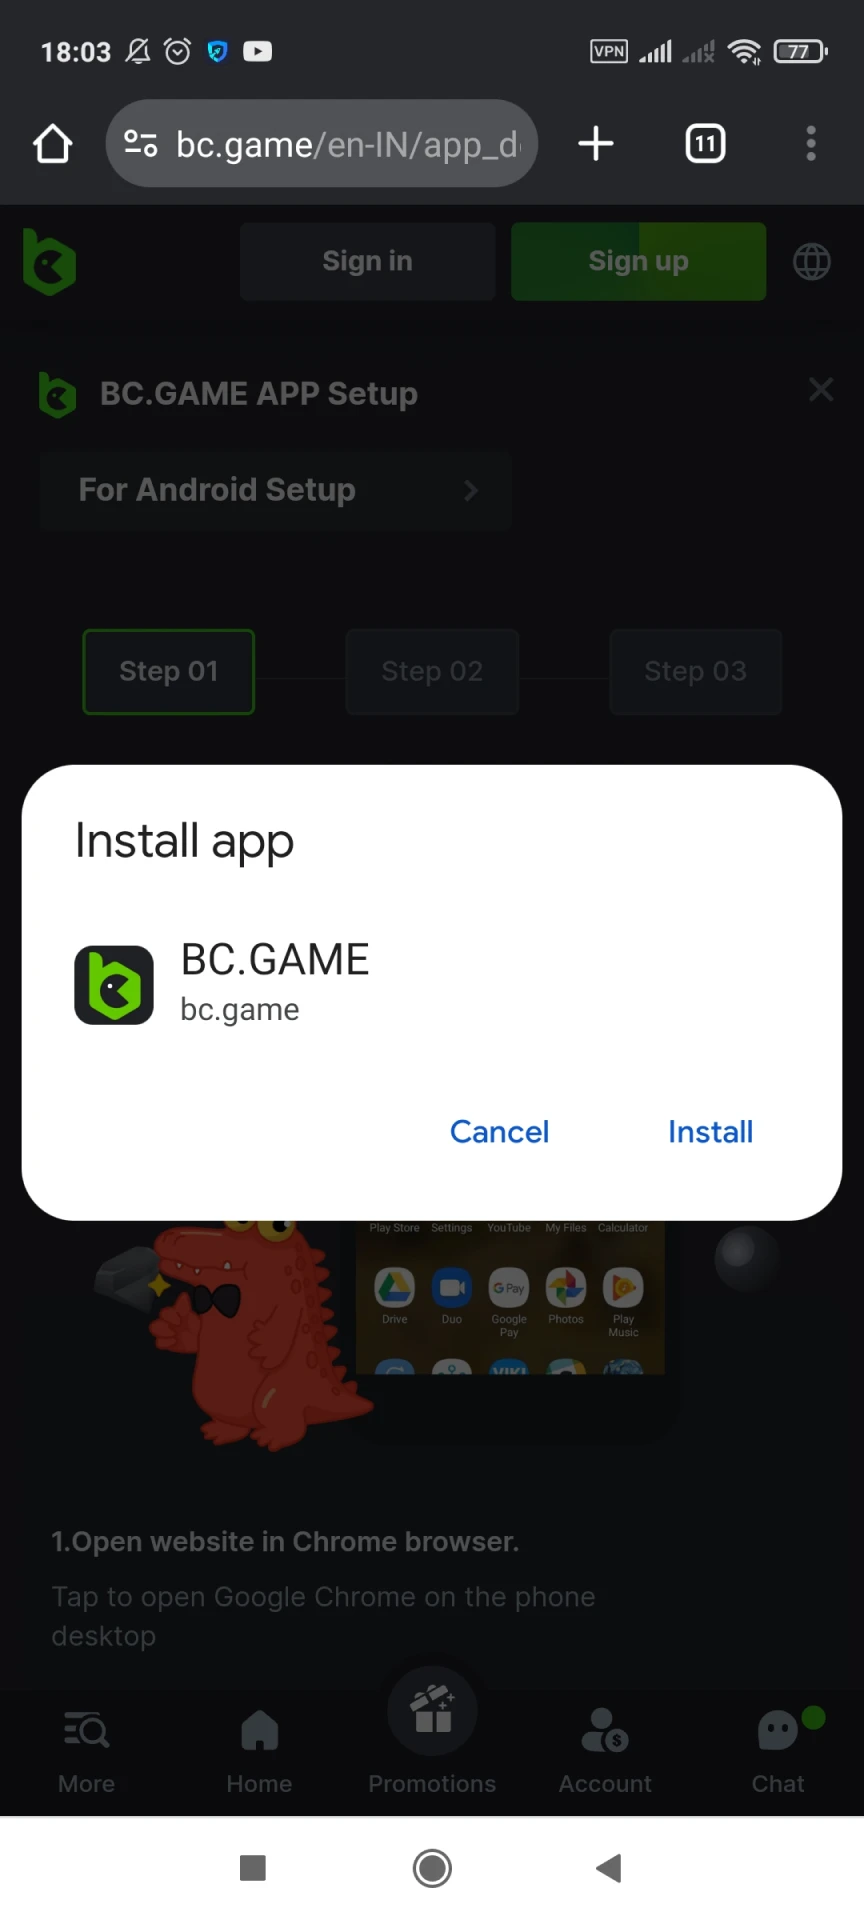 Start installing the BCGame Android application.